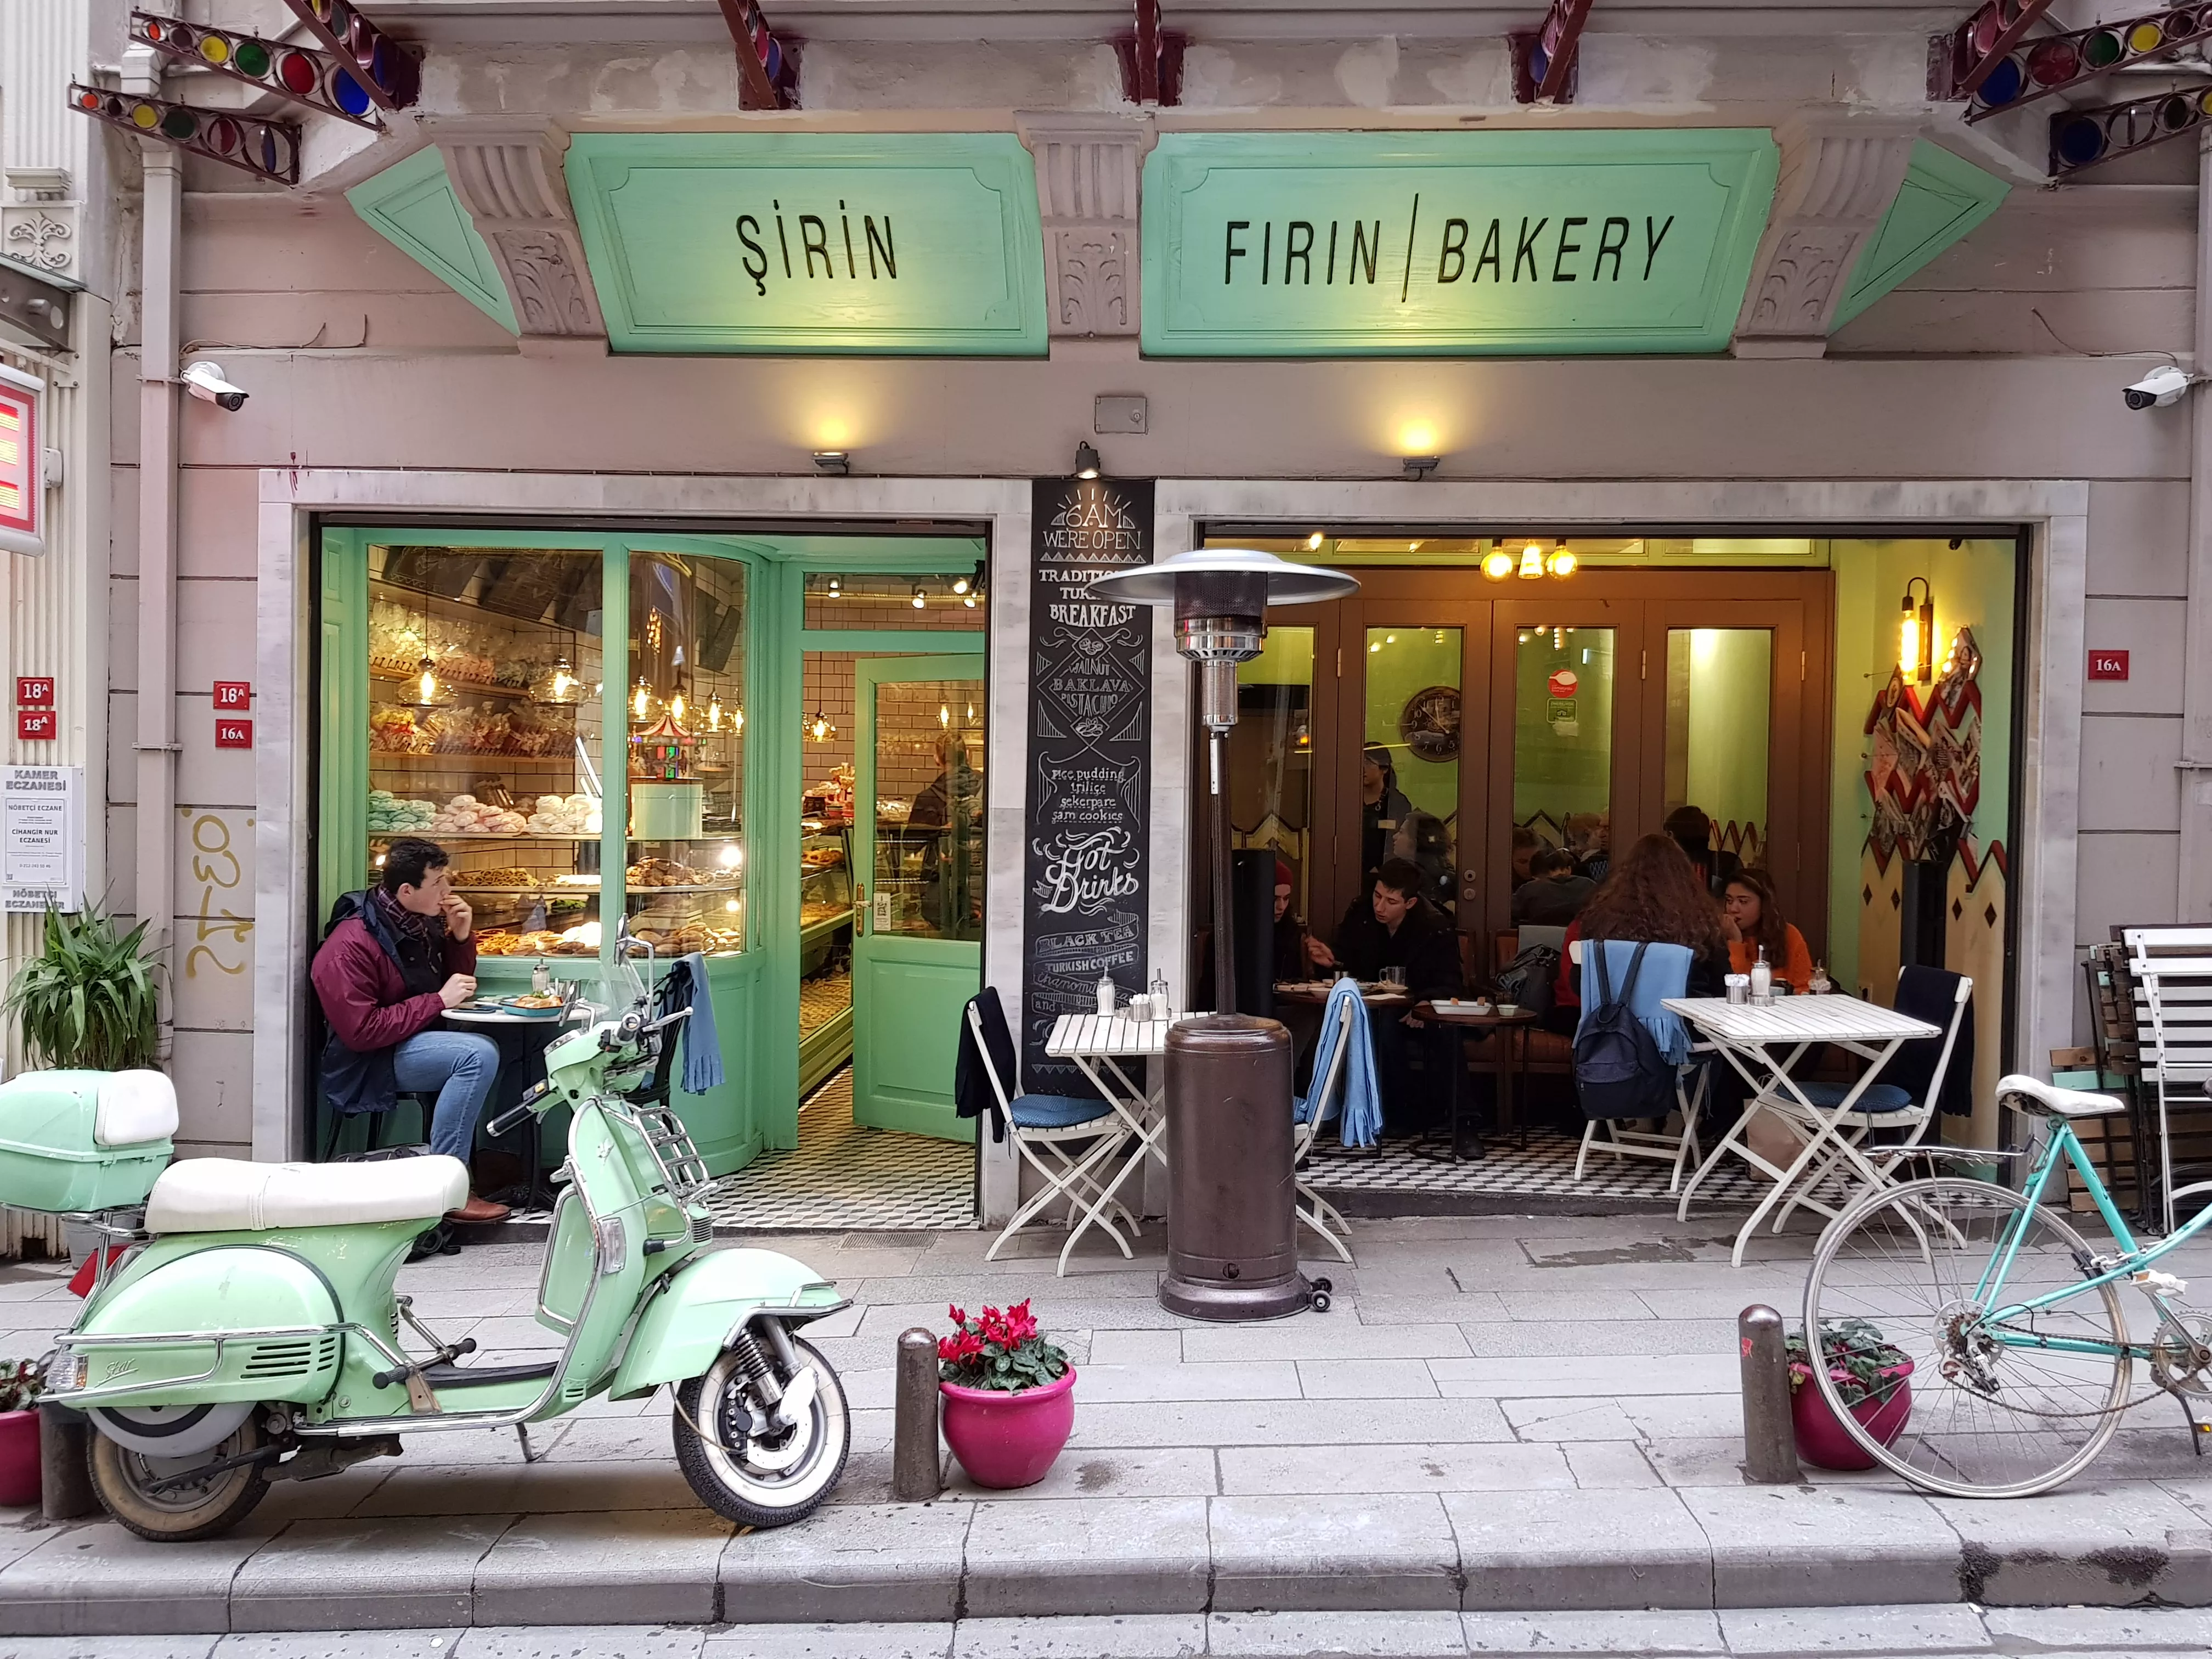 Sirinfirin Bakery in Turkey, central_asia | Baked Goods,Sweets - Country Helper